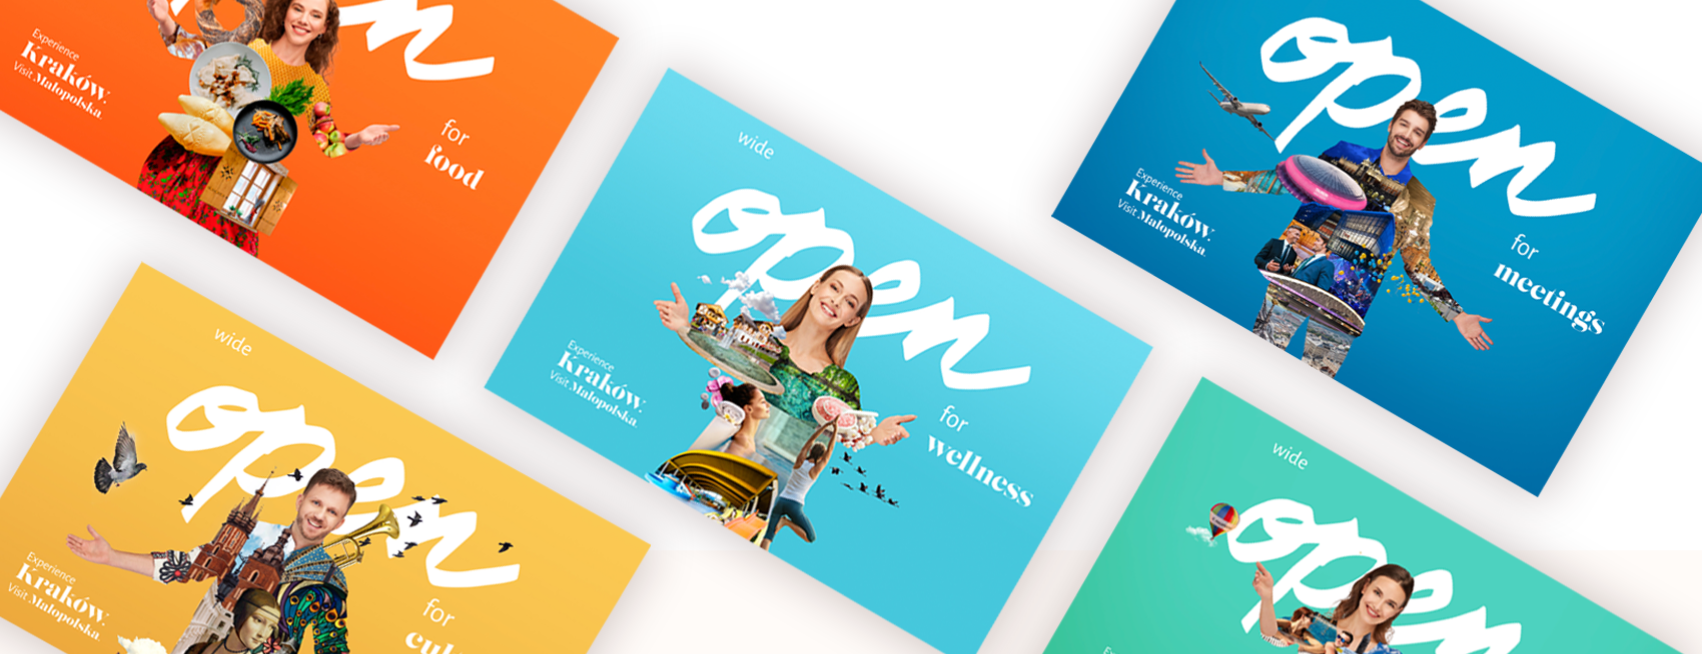 Małopolska Tourism Organisation –360 campaign posters in different colors